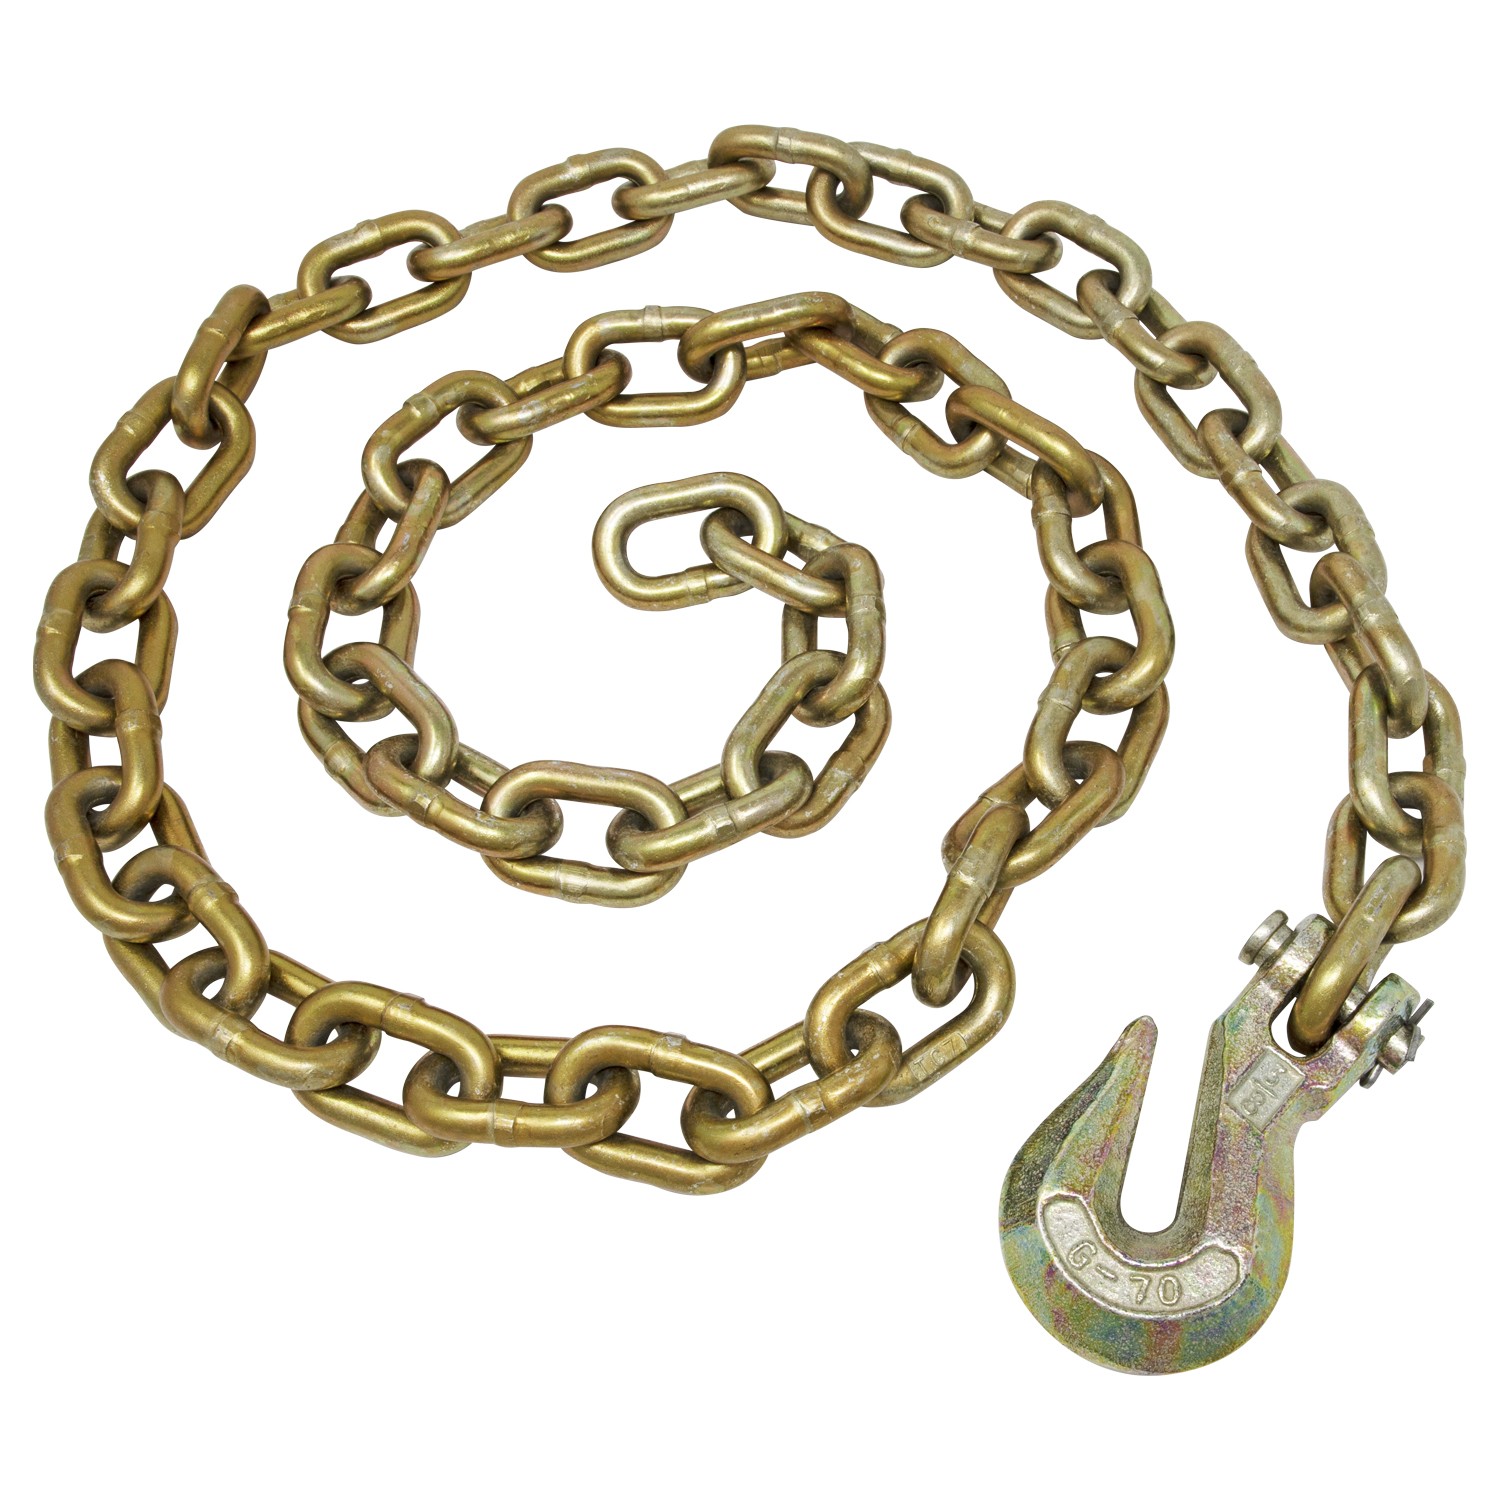 3/8" x 5' Alloy Chain with 1 Hook